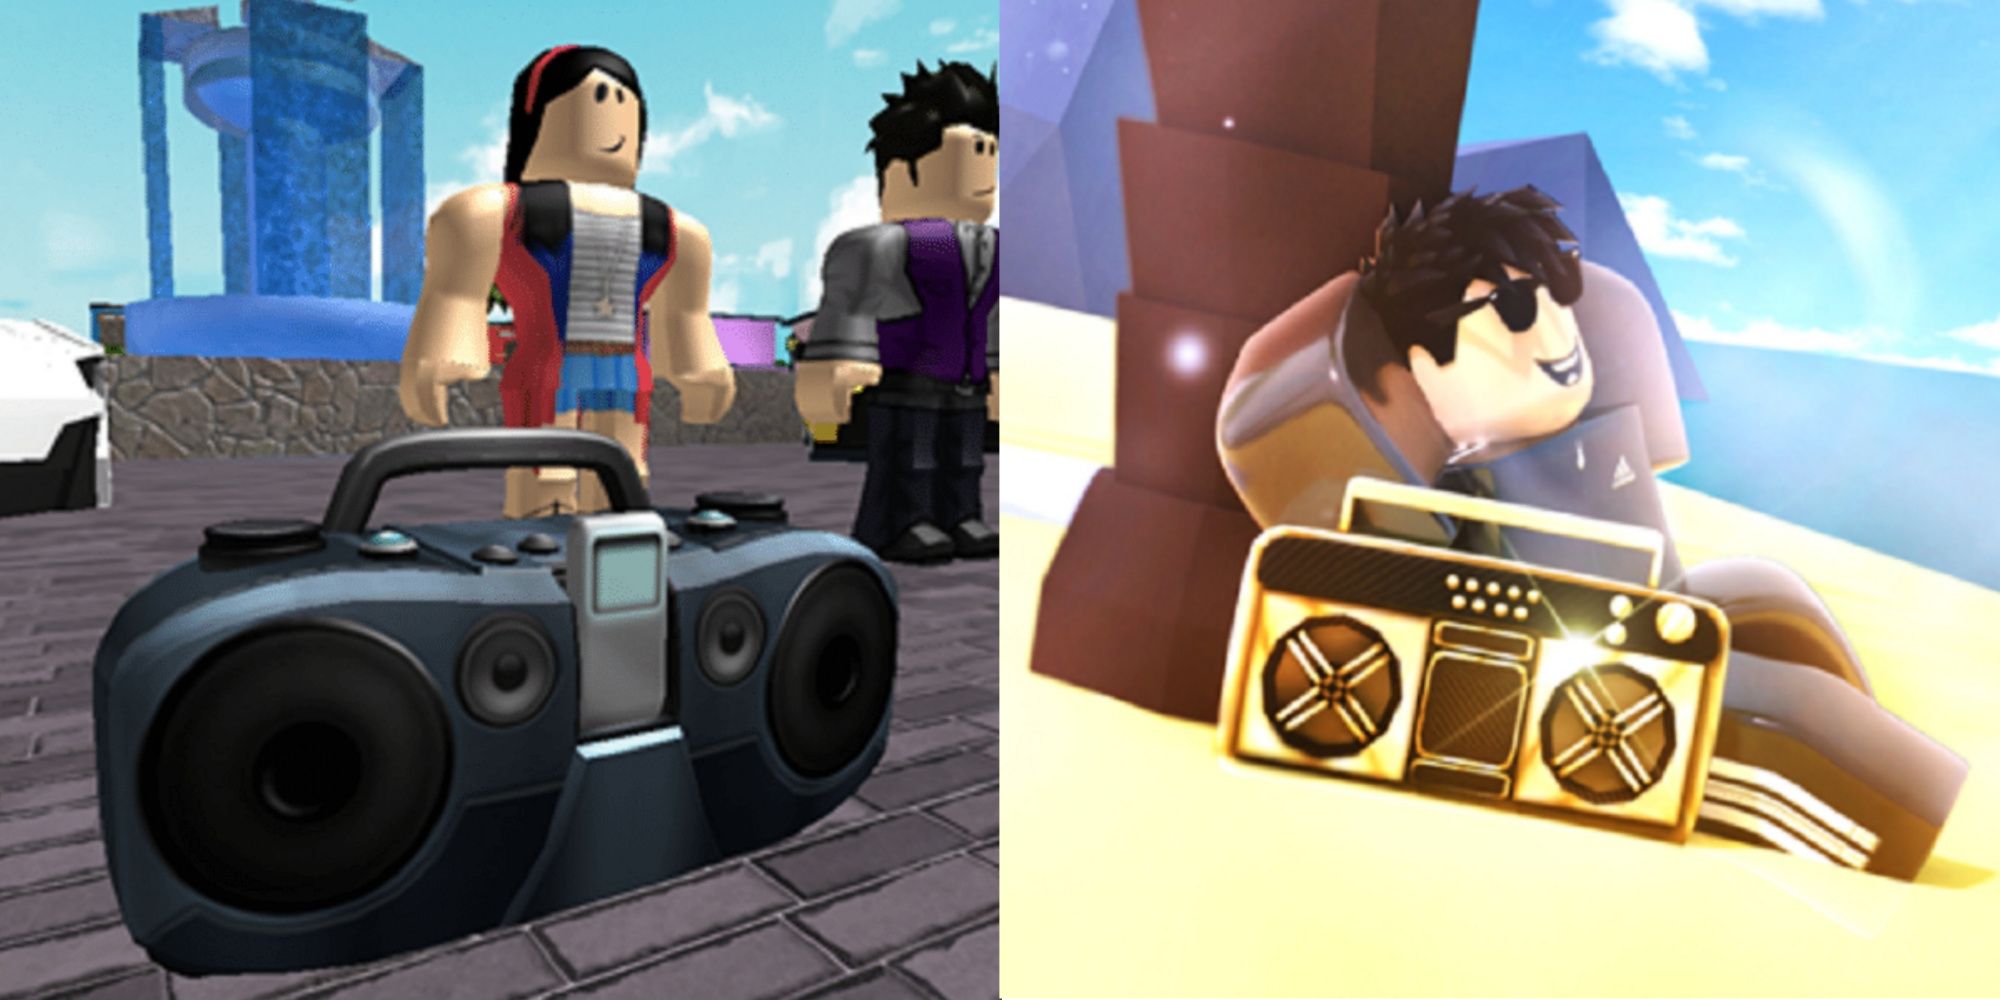 Best Music Id Codes To Plug Into The Radio In Roblox.